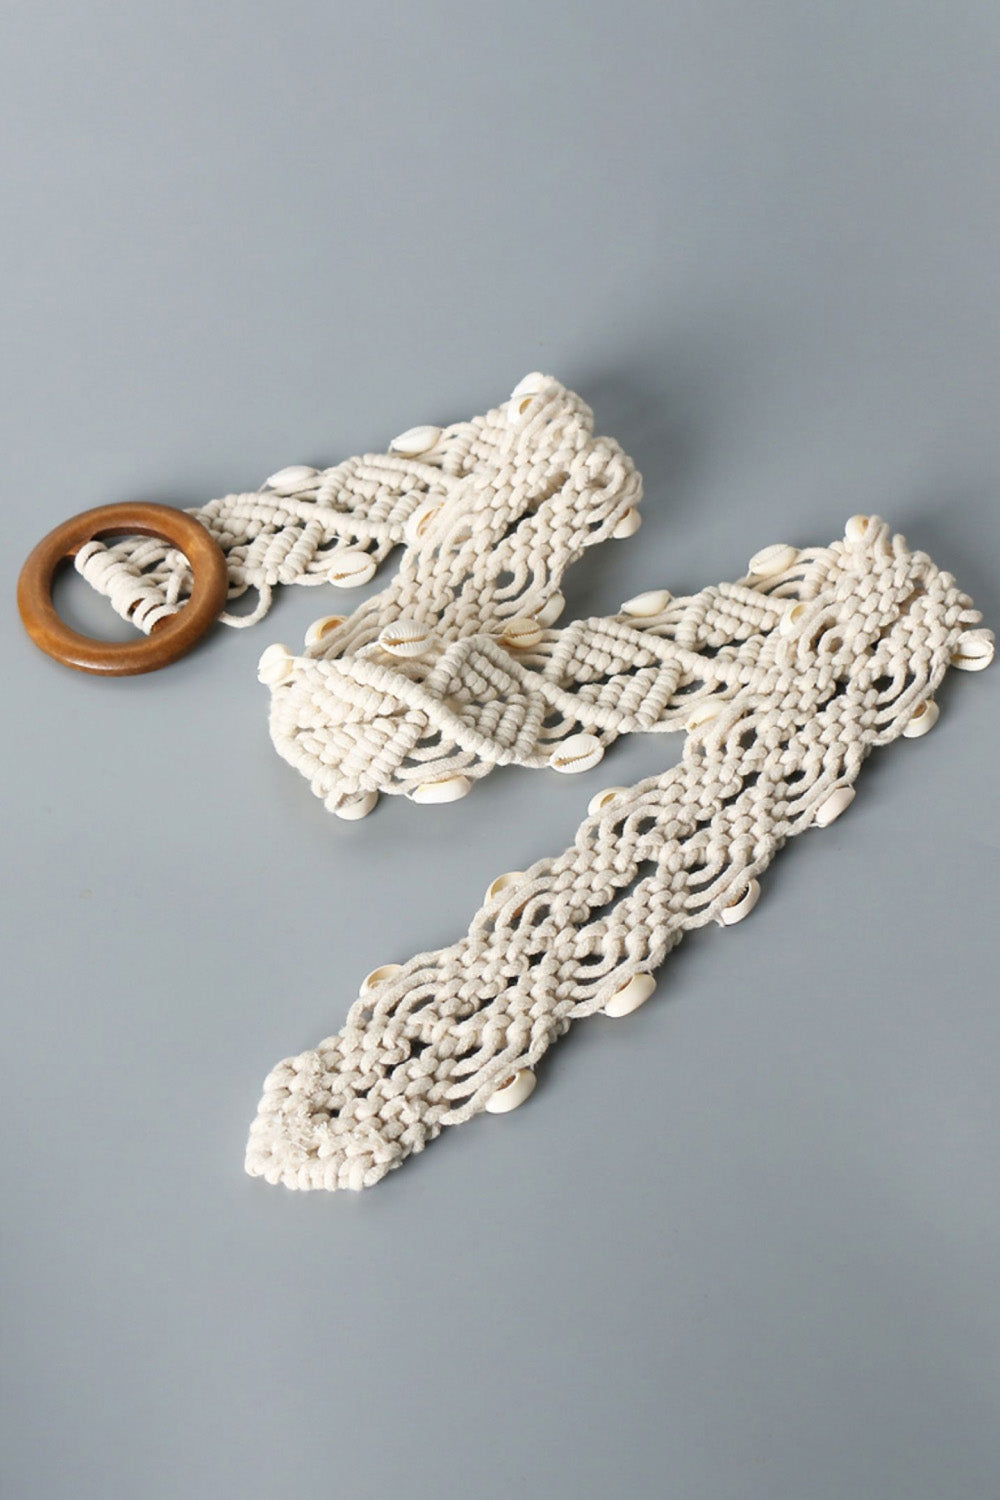 Ivory Shell Braid Belt with Wood Buckle